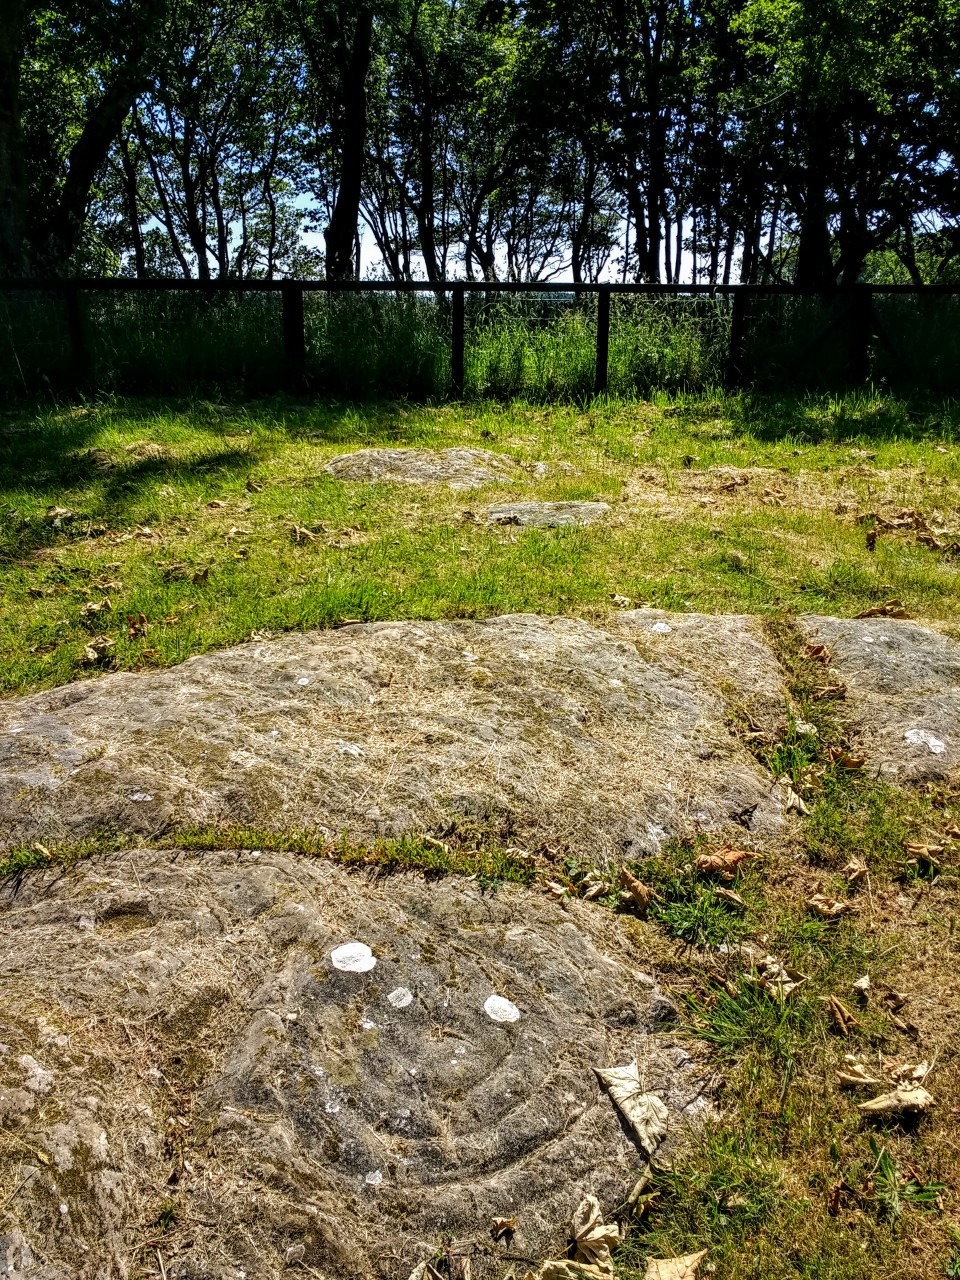 Drumtroddan Carved Rocks (Cup and Ring Marks / Rock Art) by spencer